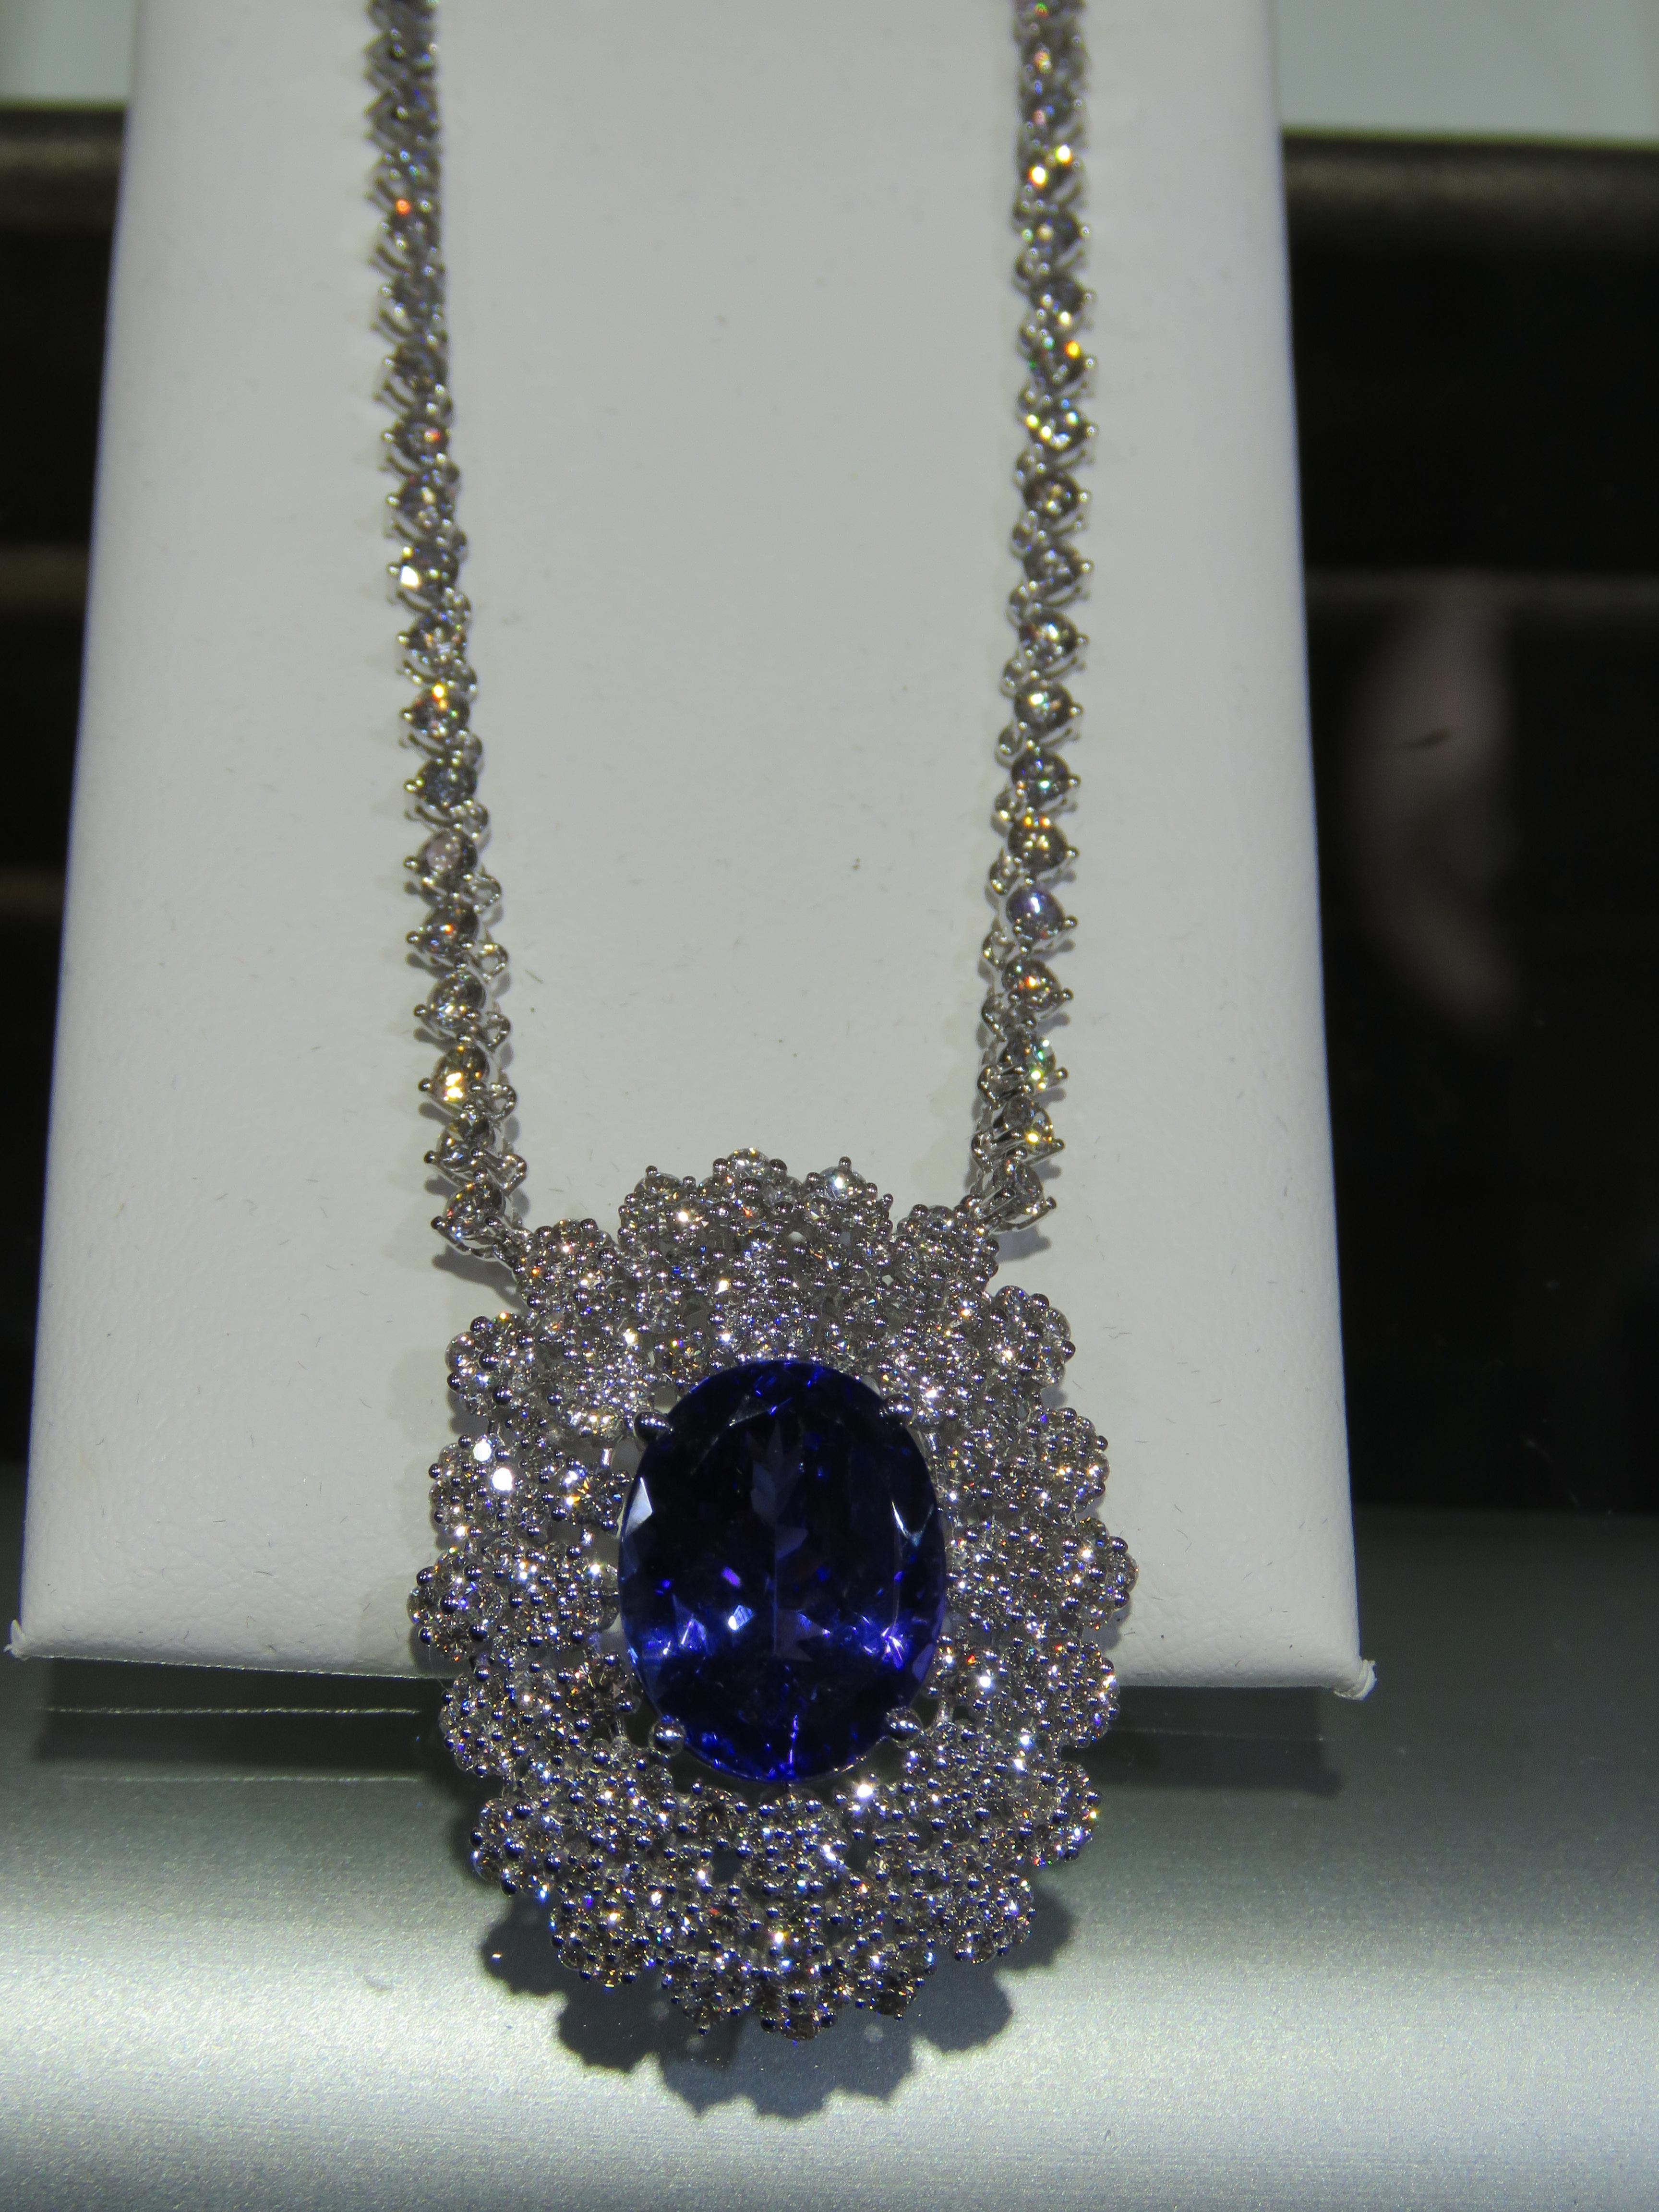 The Following Item we are offering is this Rare Important Radiant 18KT Gold Gorgeous and Sparkling Magnificent Fancy Tanzanite and Diamond Necklace. Necklace features approx 16CTS of a Beautiful Fancy Tanzanite and Glittering Diamonds!!! This